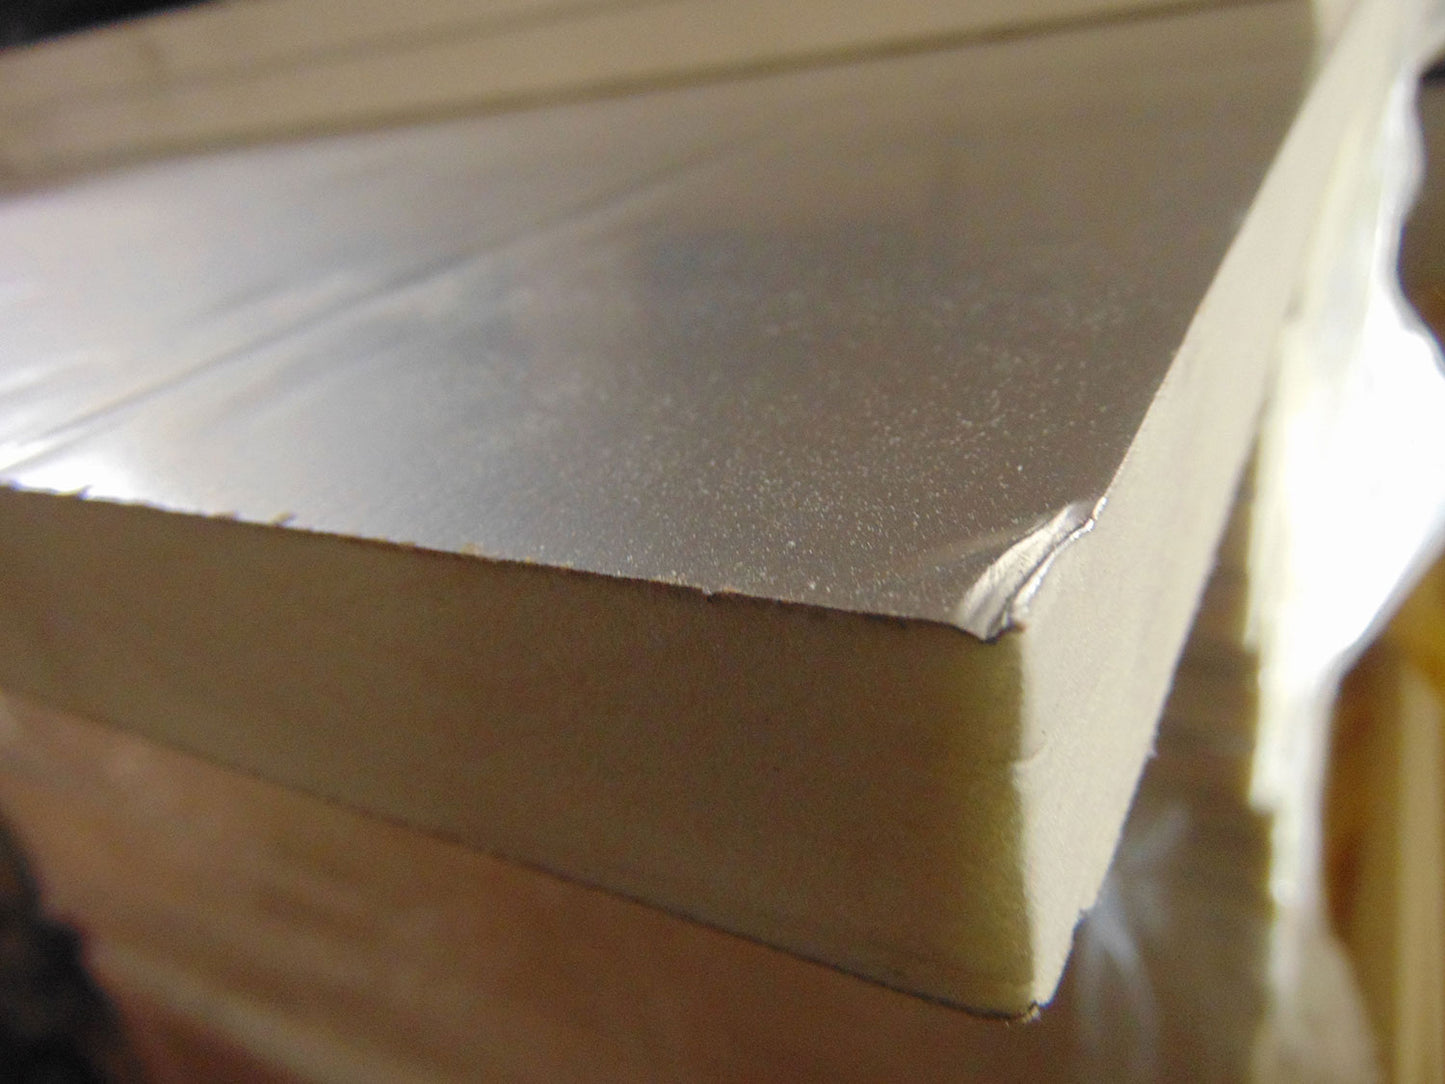 Insulation Sheet Foil Backed 2.4m x 1.2m x 25mm